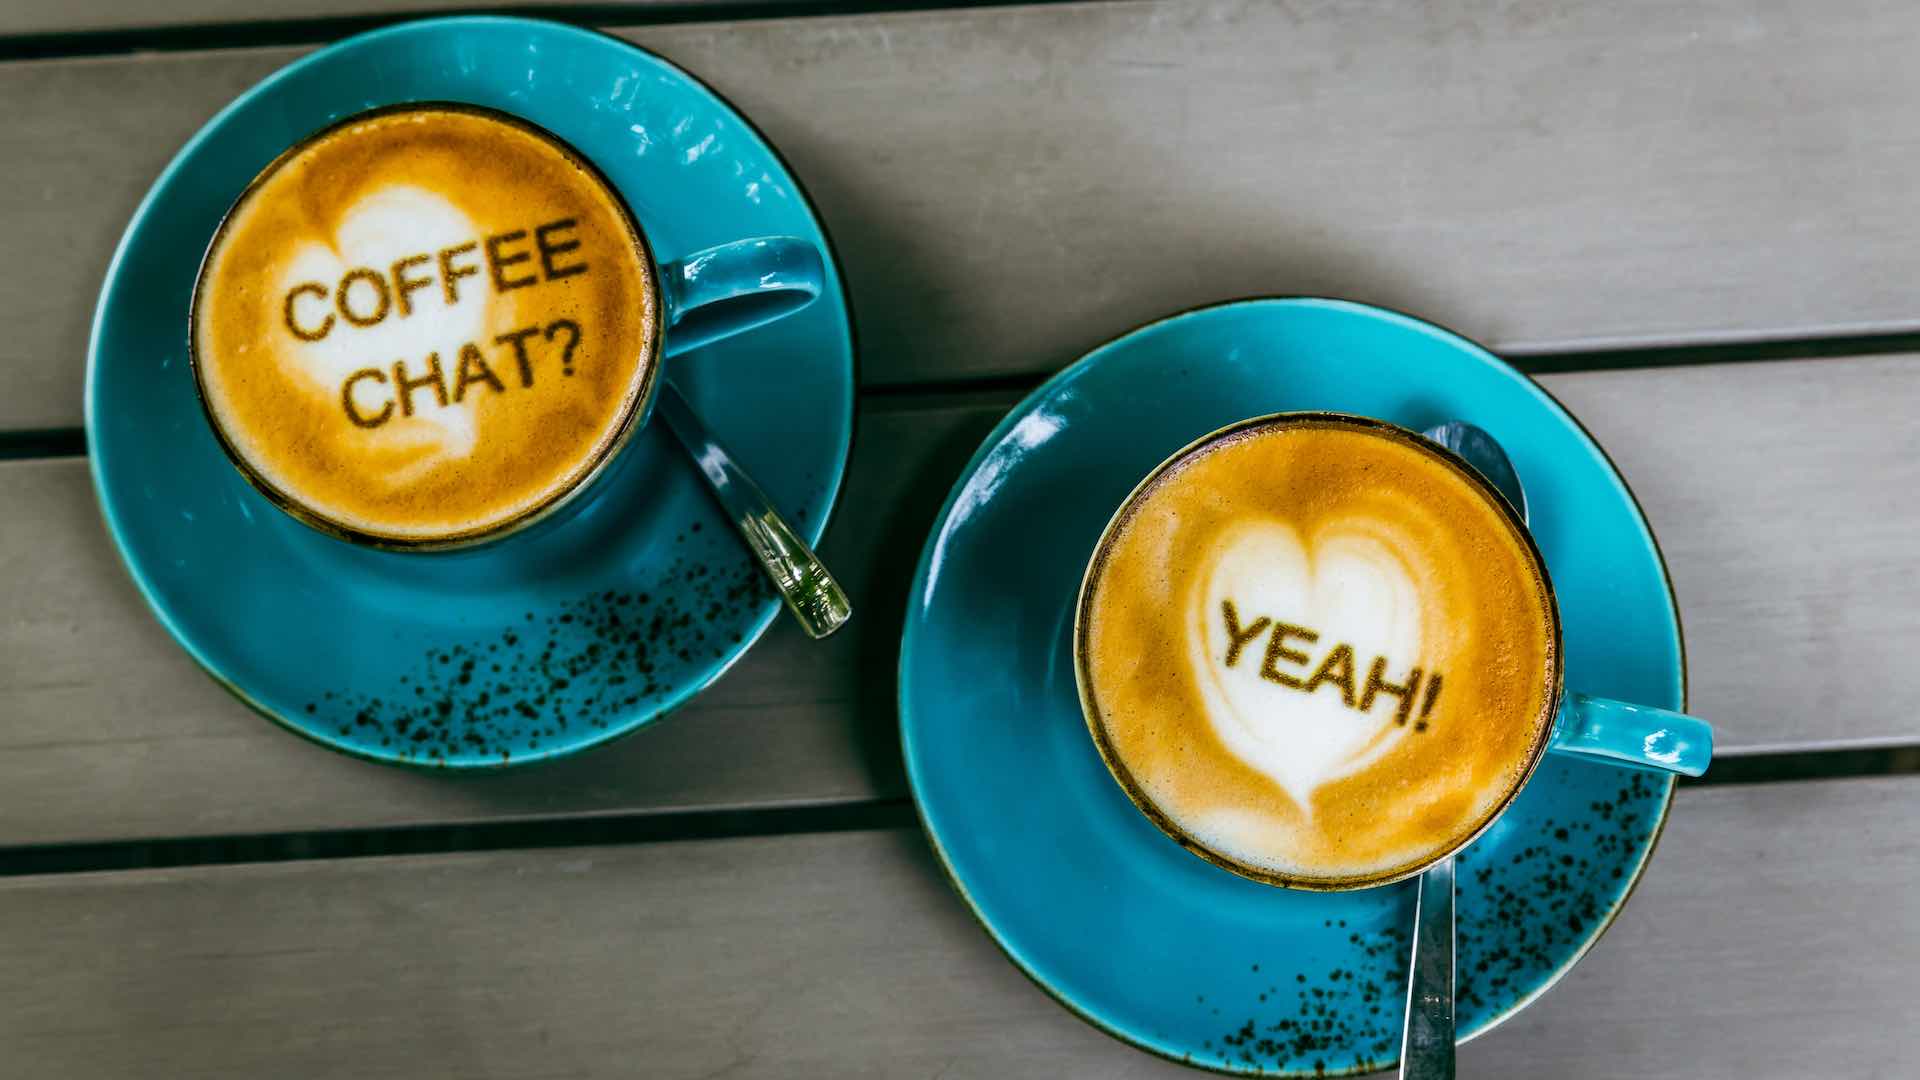 Coffee and chat